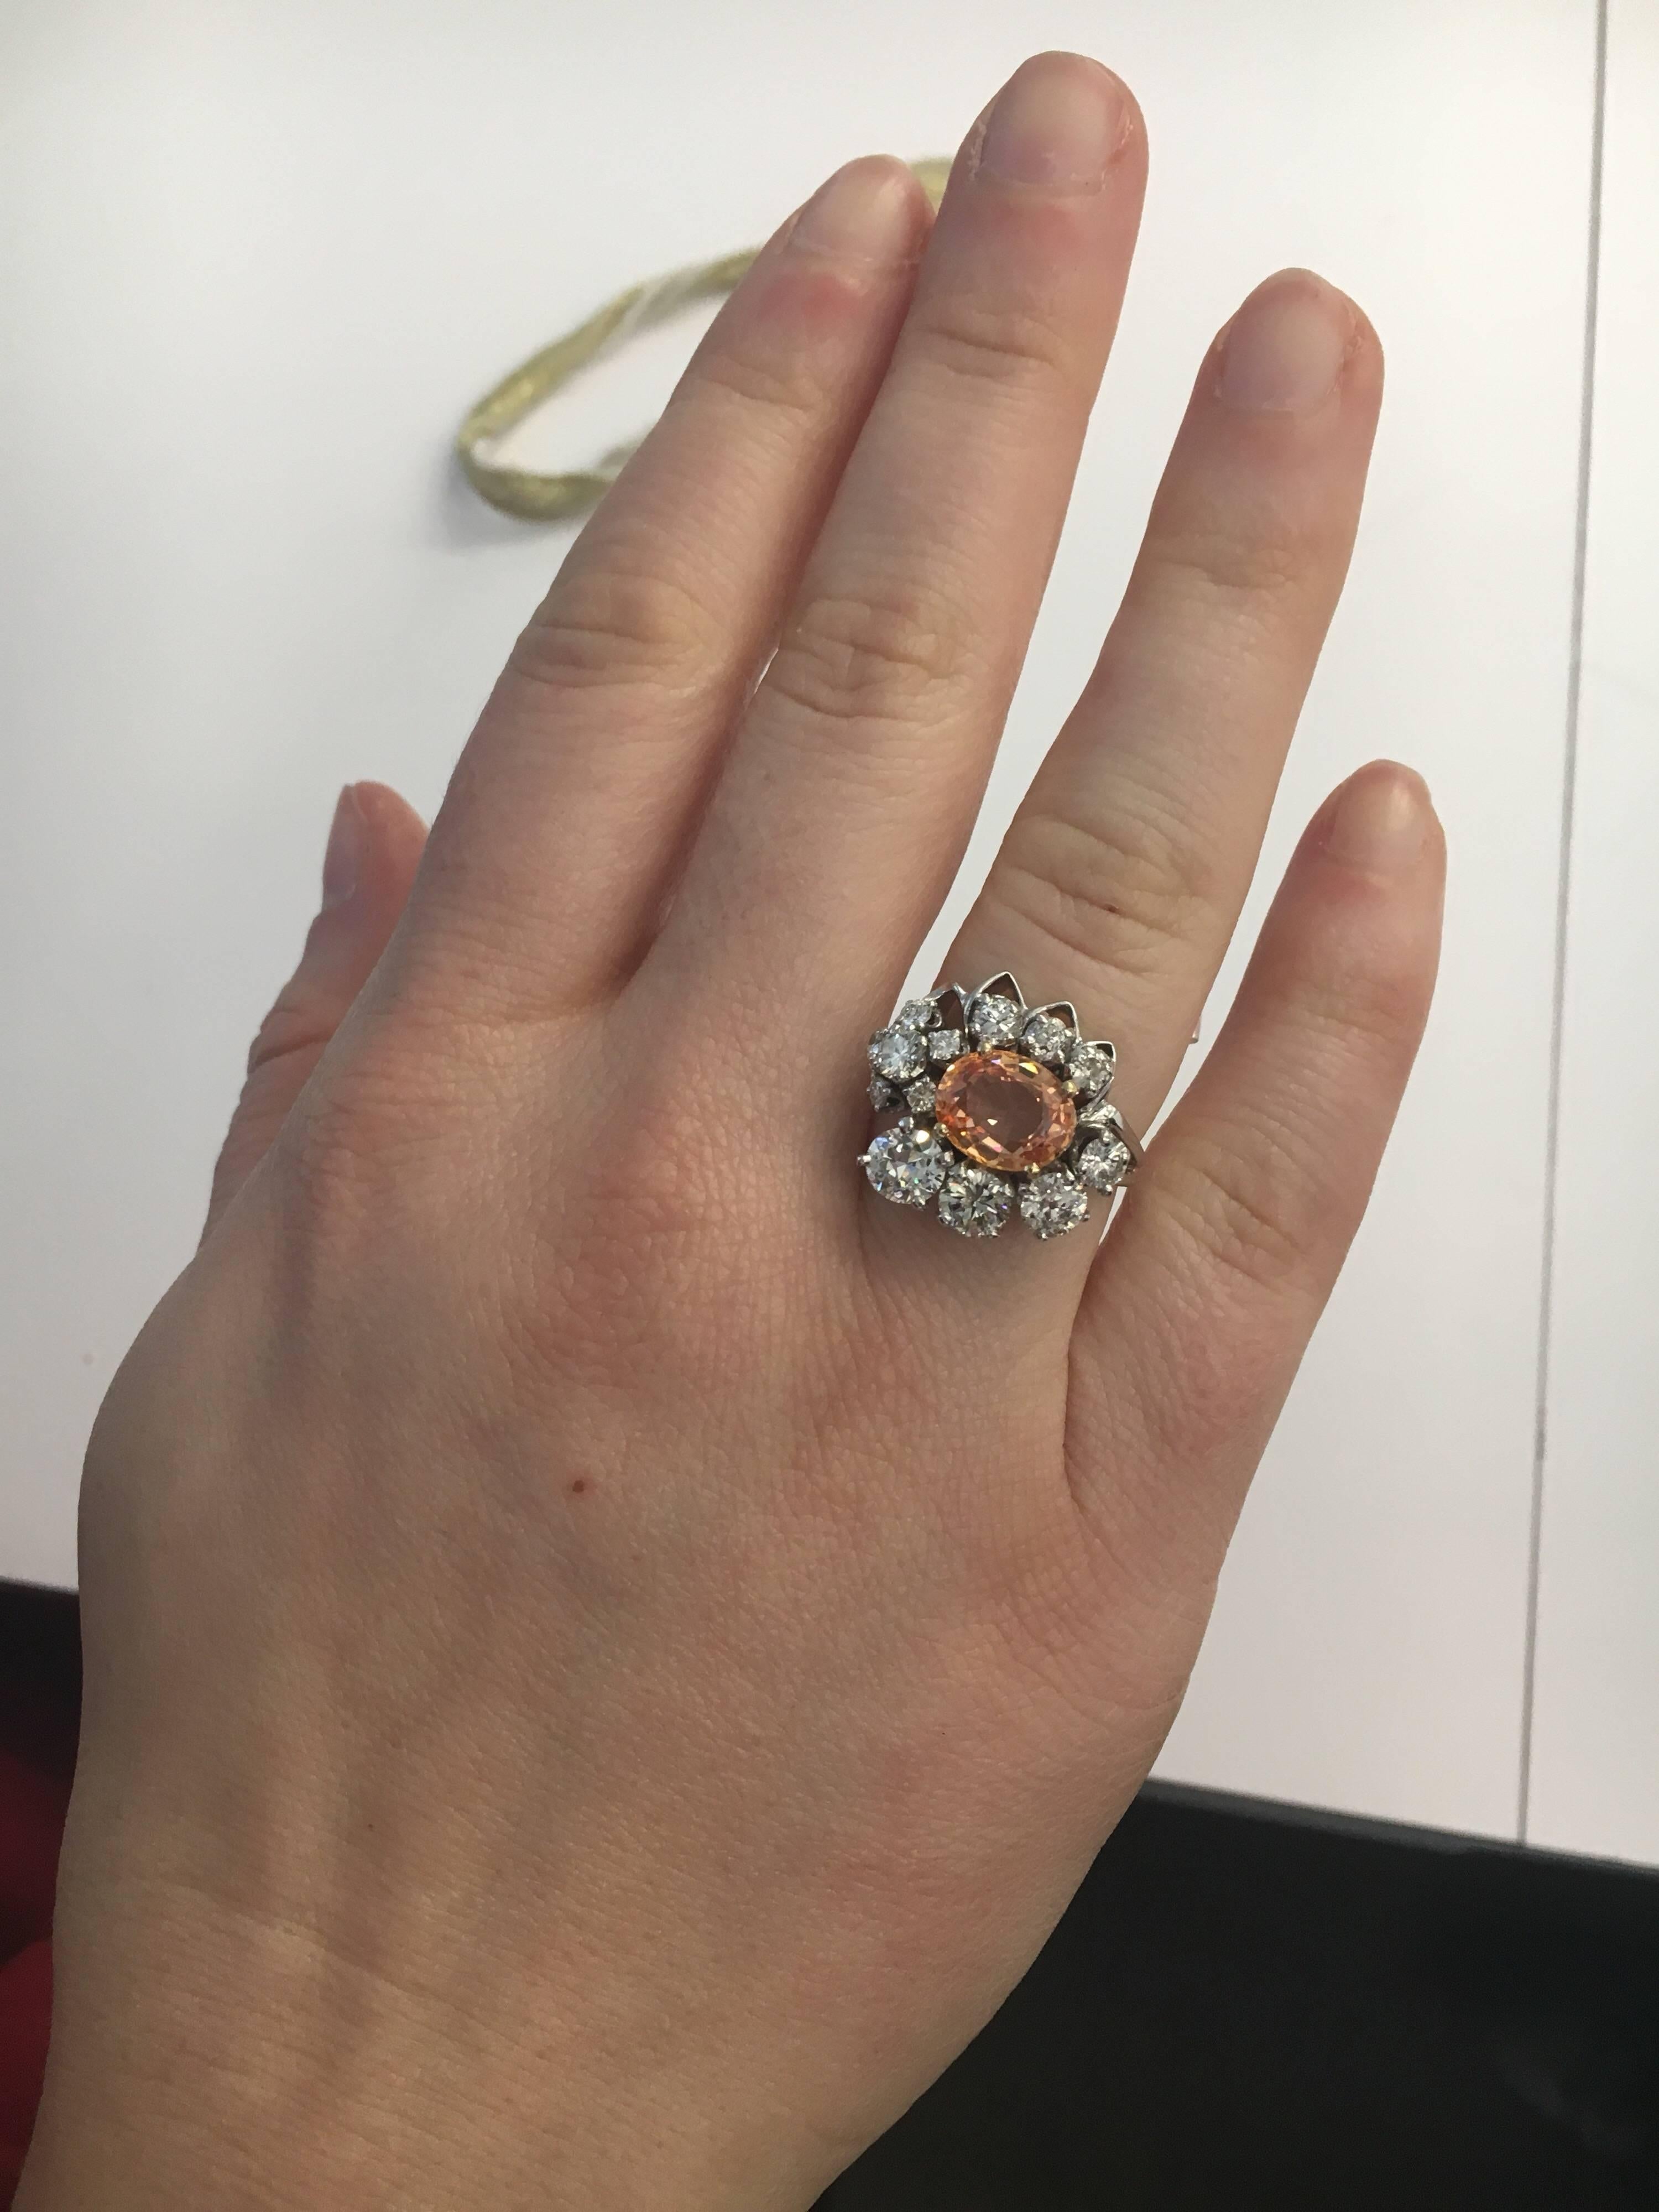 Approx total weight: 5.05 cts
Diamond Color: E-F
Diamond Clarity: Vs 
Cut: Excellent 
As noted we are vetted and rated a Top Seller on 1stdibs falling into the top 25% of dealers listed here.
Appraisal from AGI an outside reputable lab will be